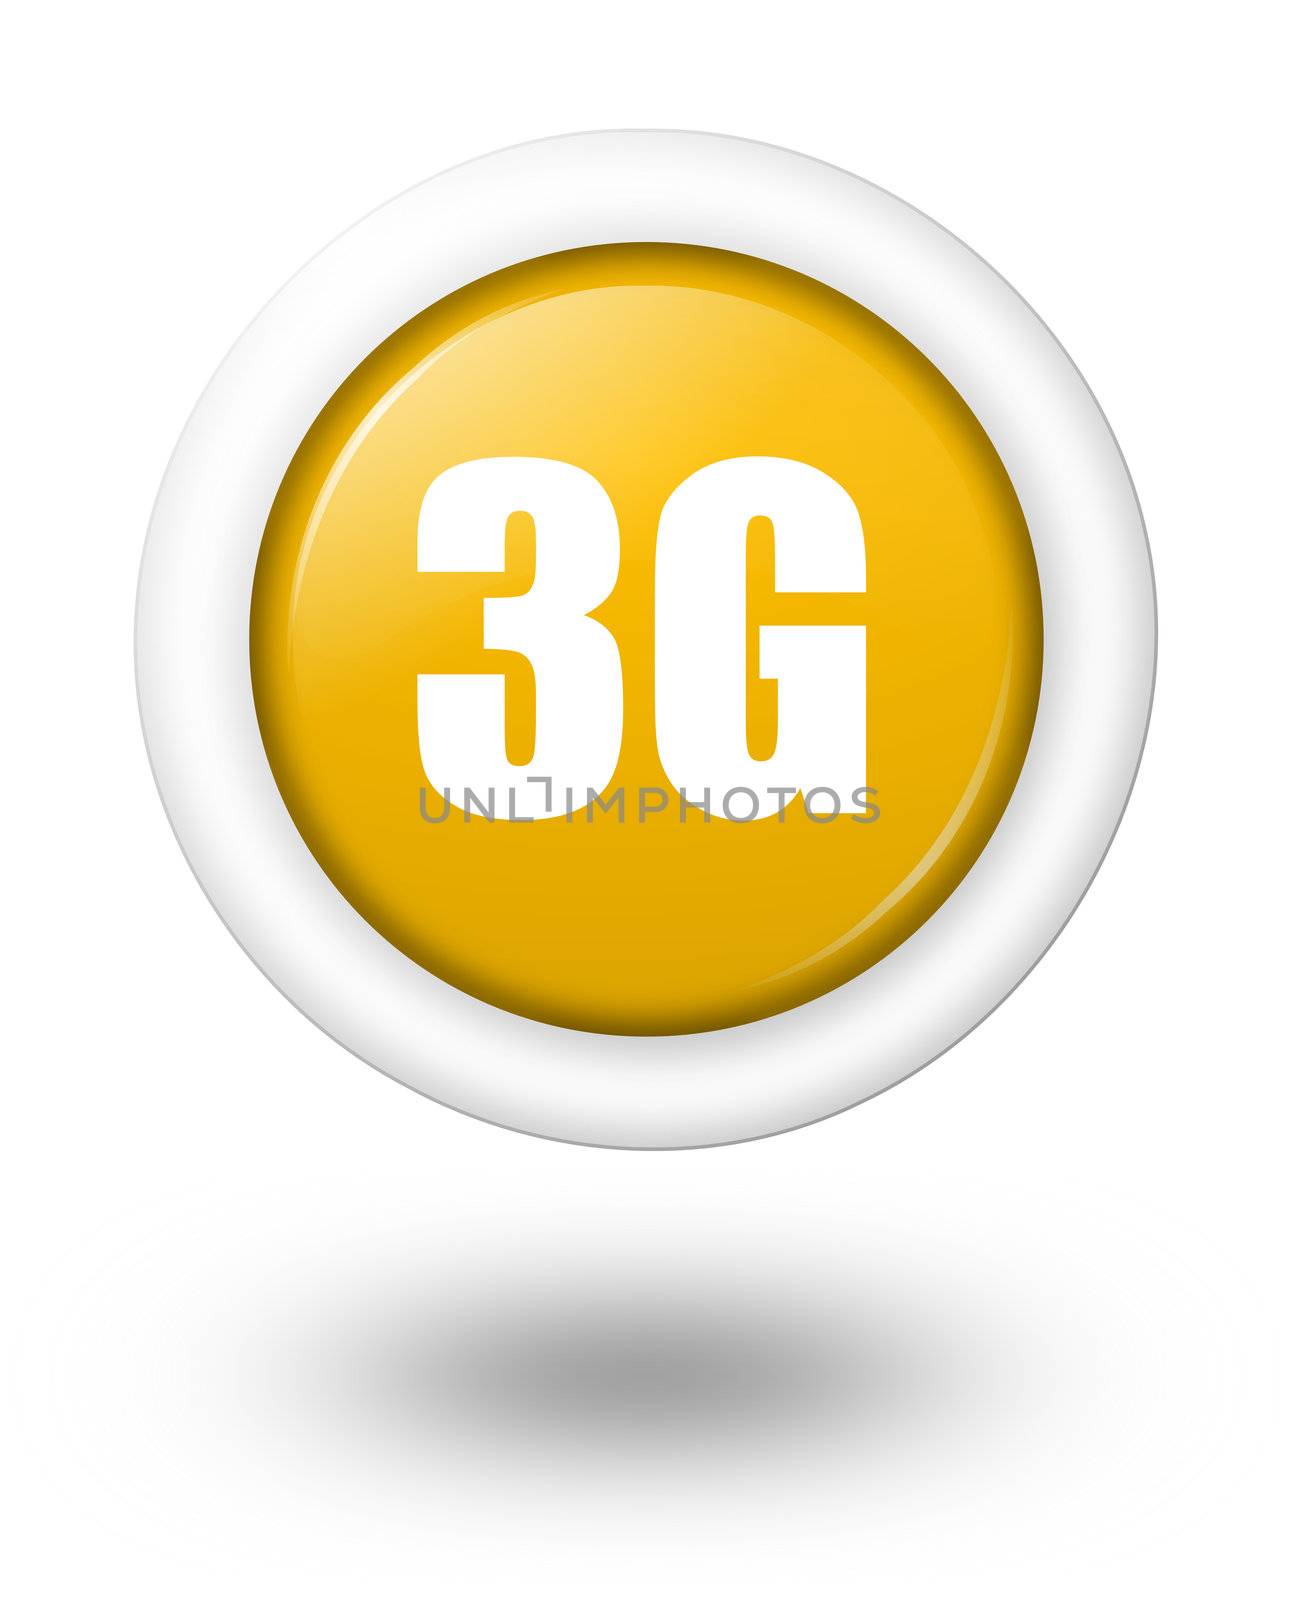 3G telecommunication symbol with white border and shadow